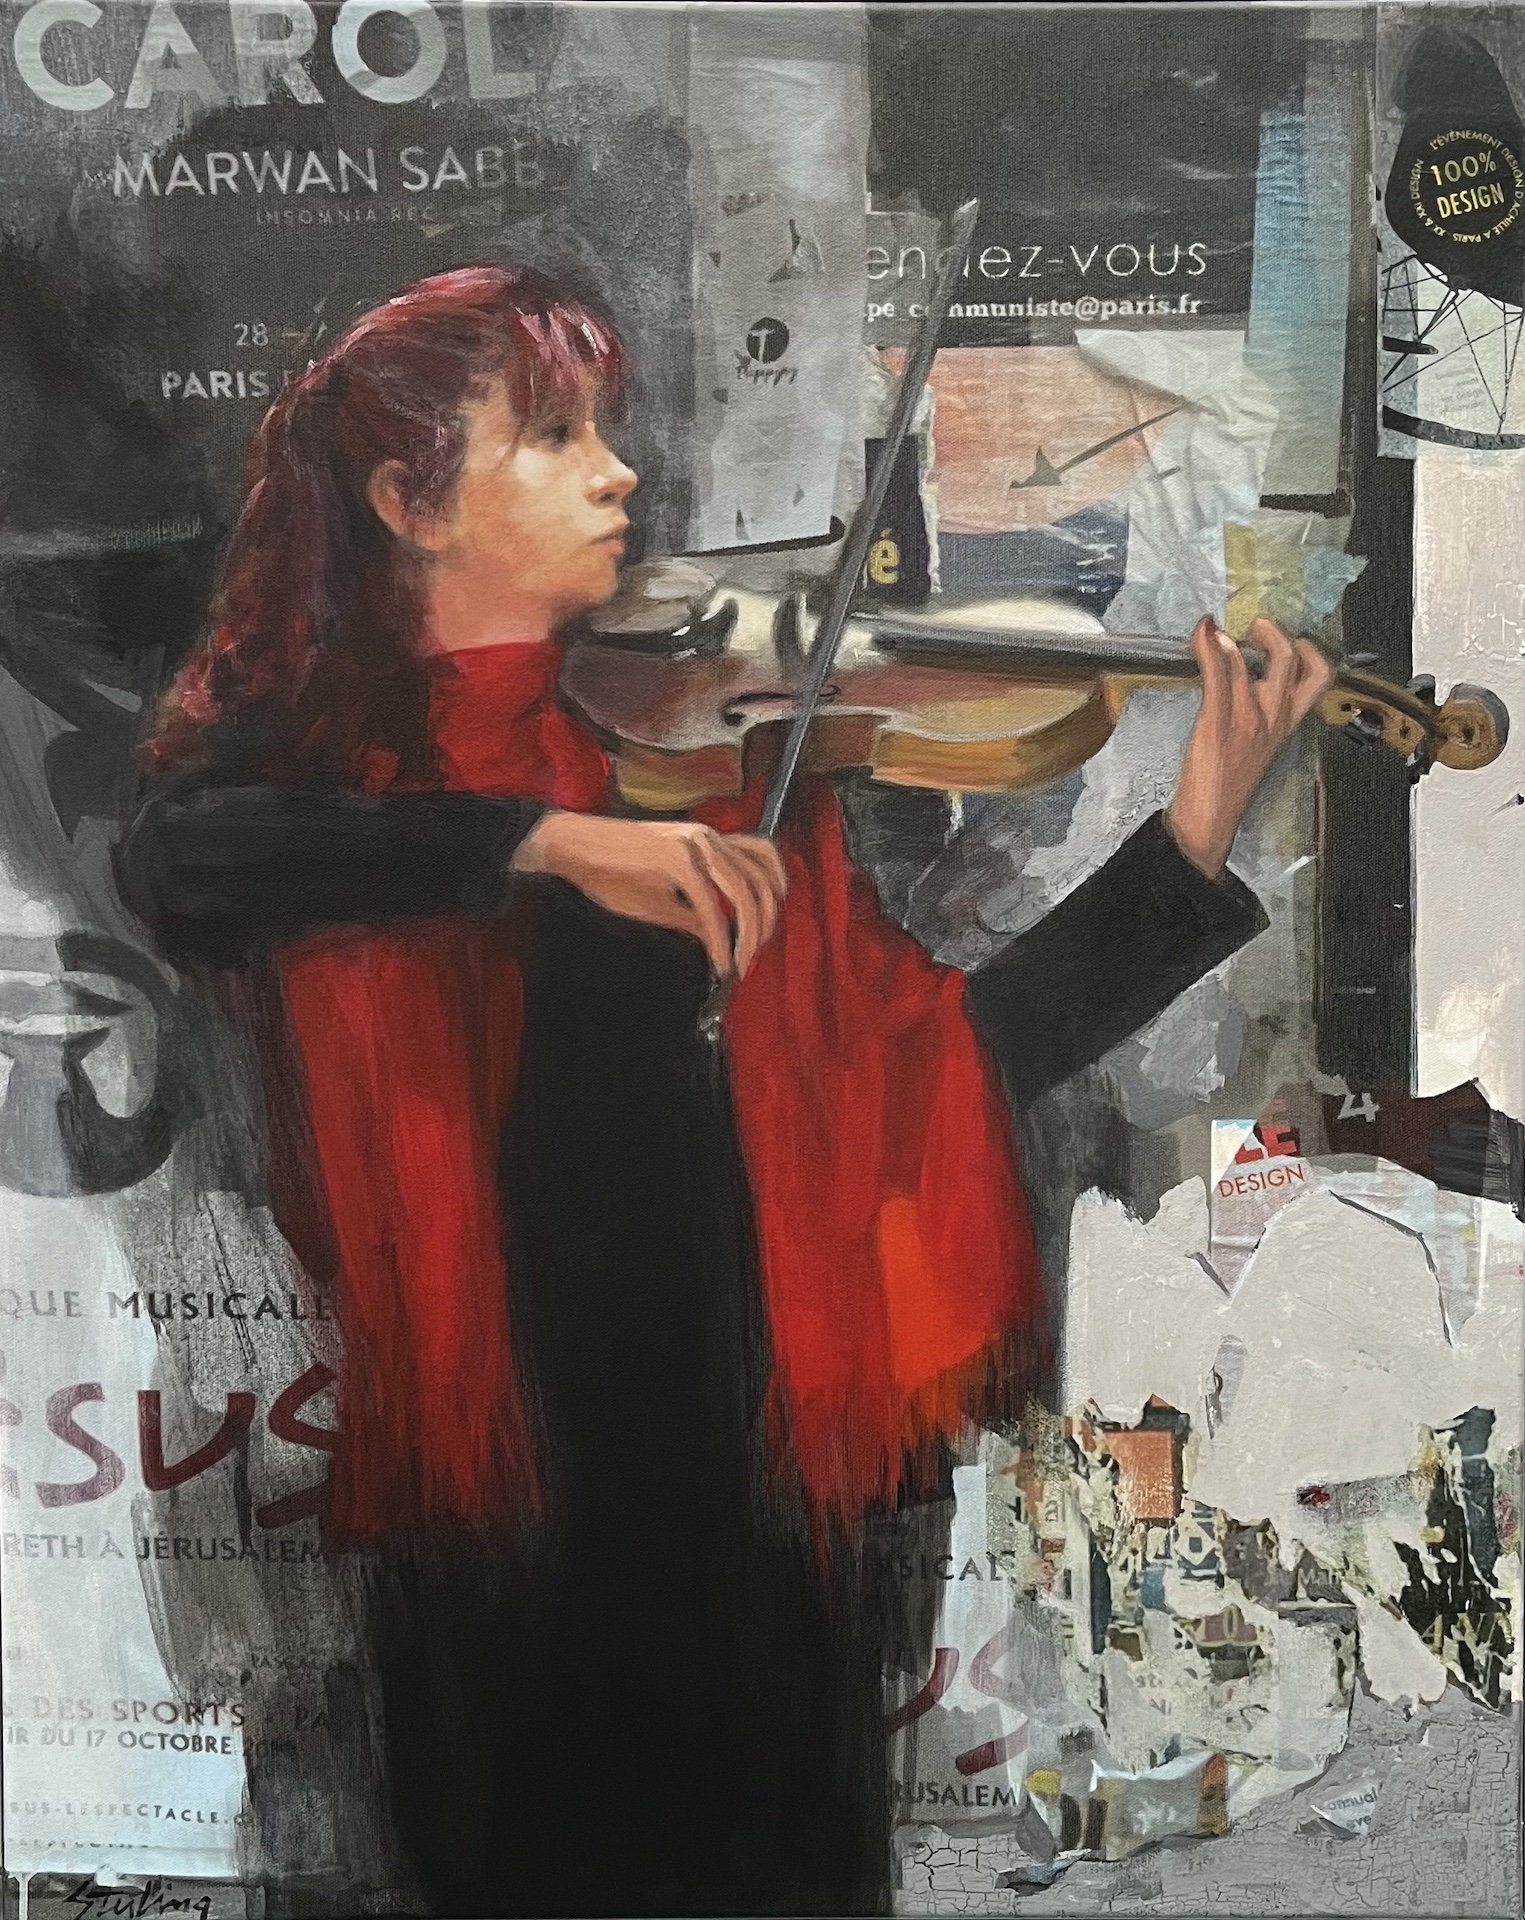 Street Musician in Red Scarf
mixed media
24x30